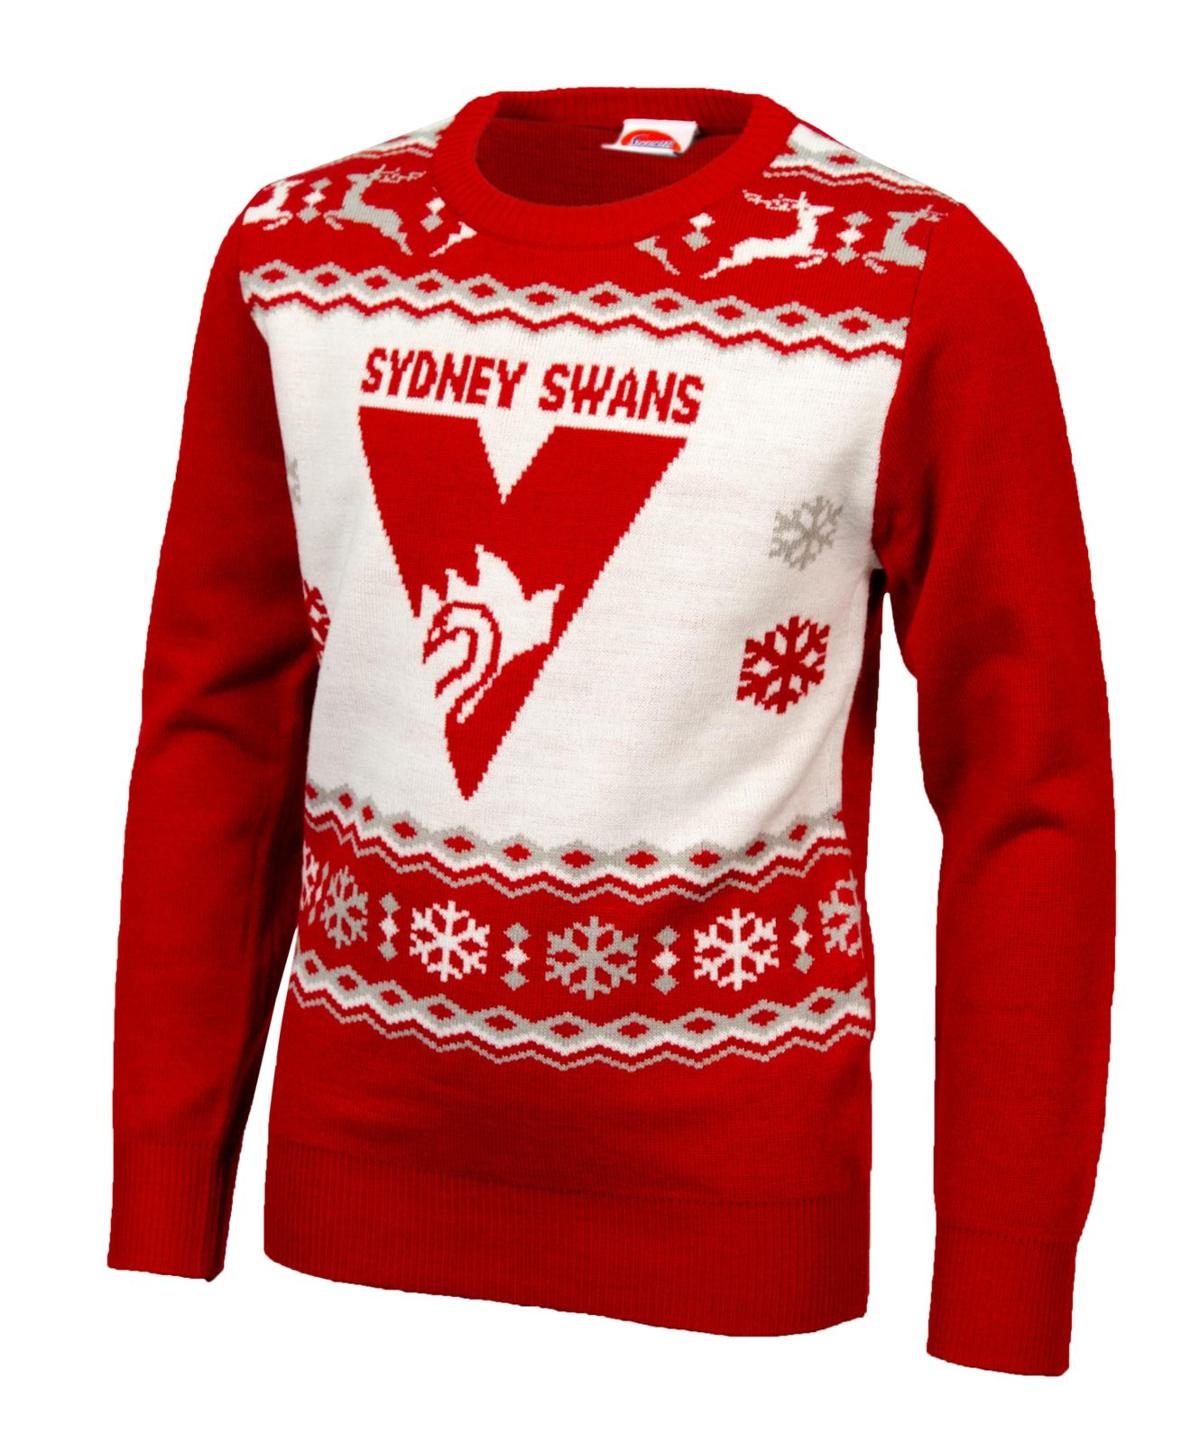 Sydney Swans Ugly Christmas Sweater For Fans